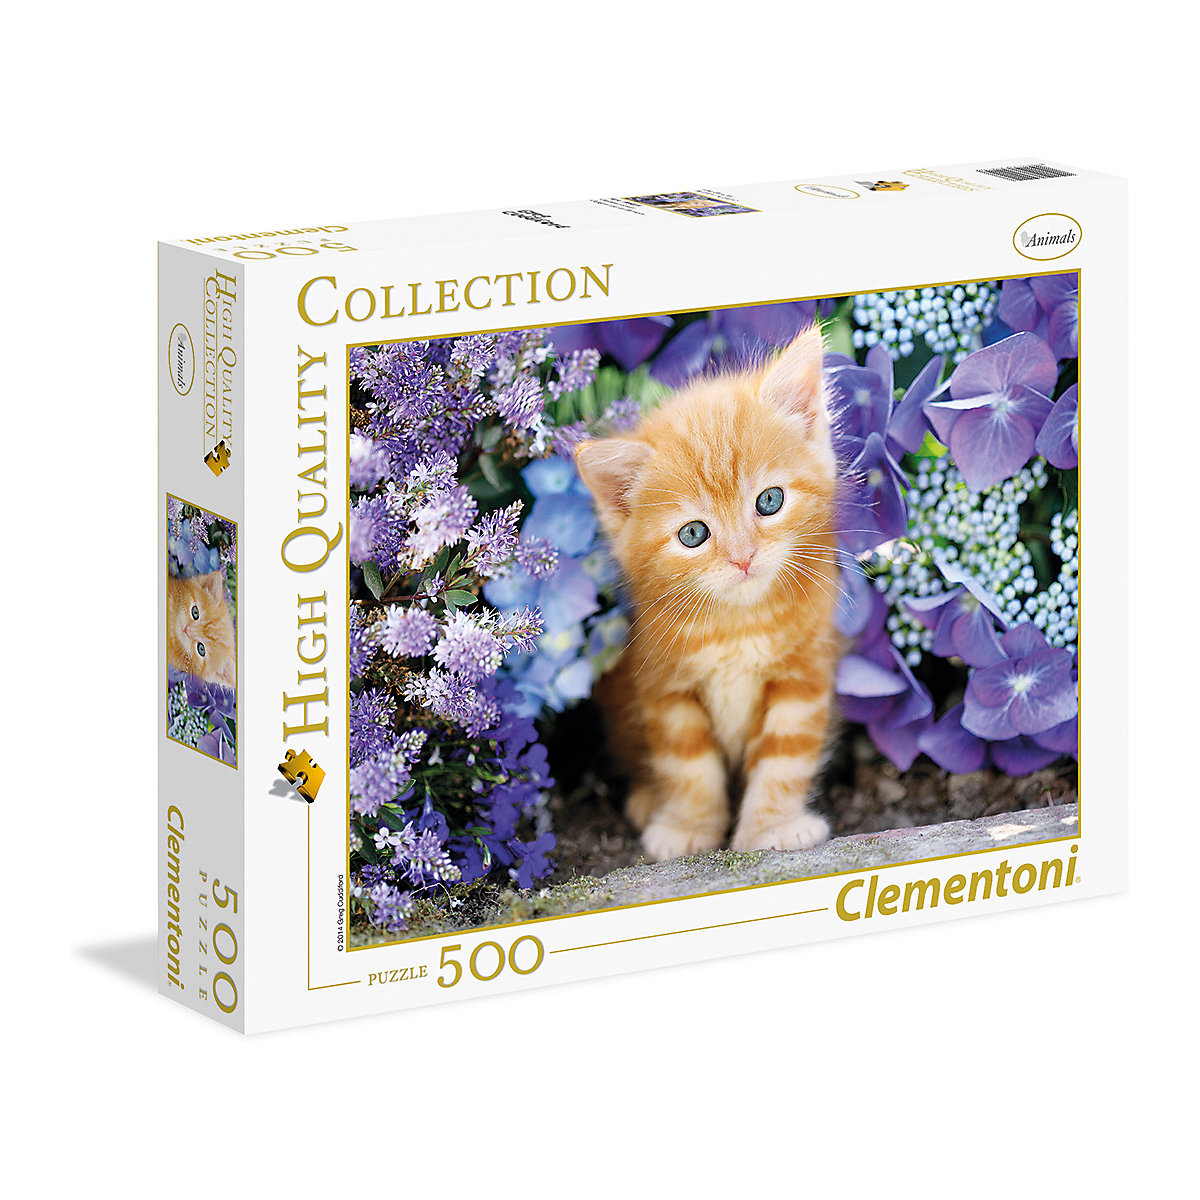 Clementoni Puzzle 500 Teile High Quality Collection Katze im Blumenmeer